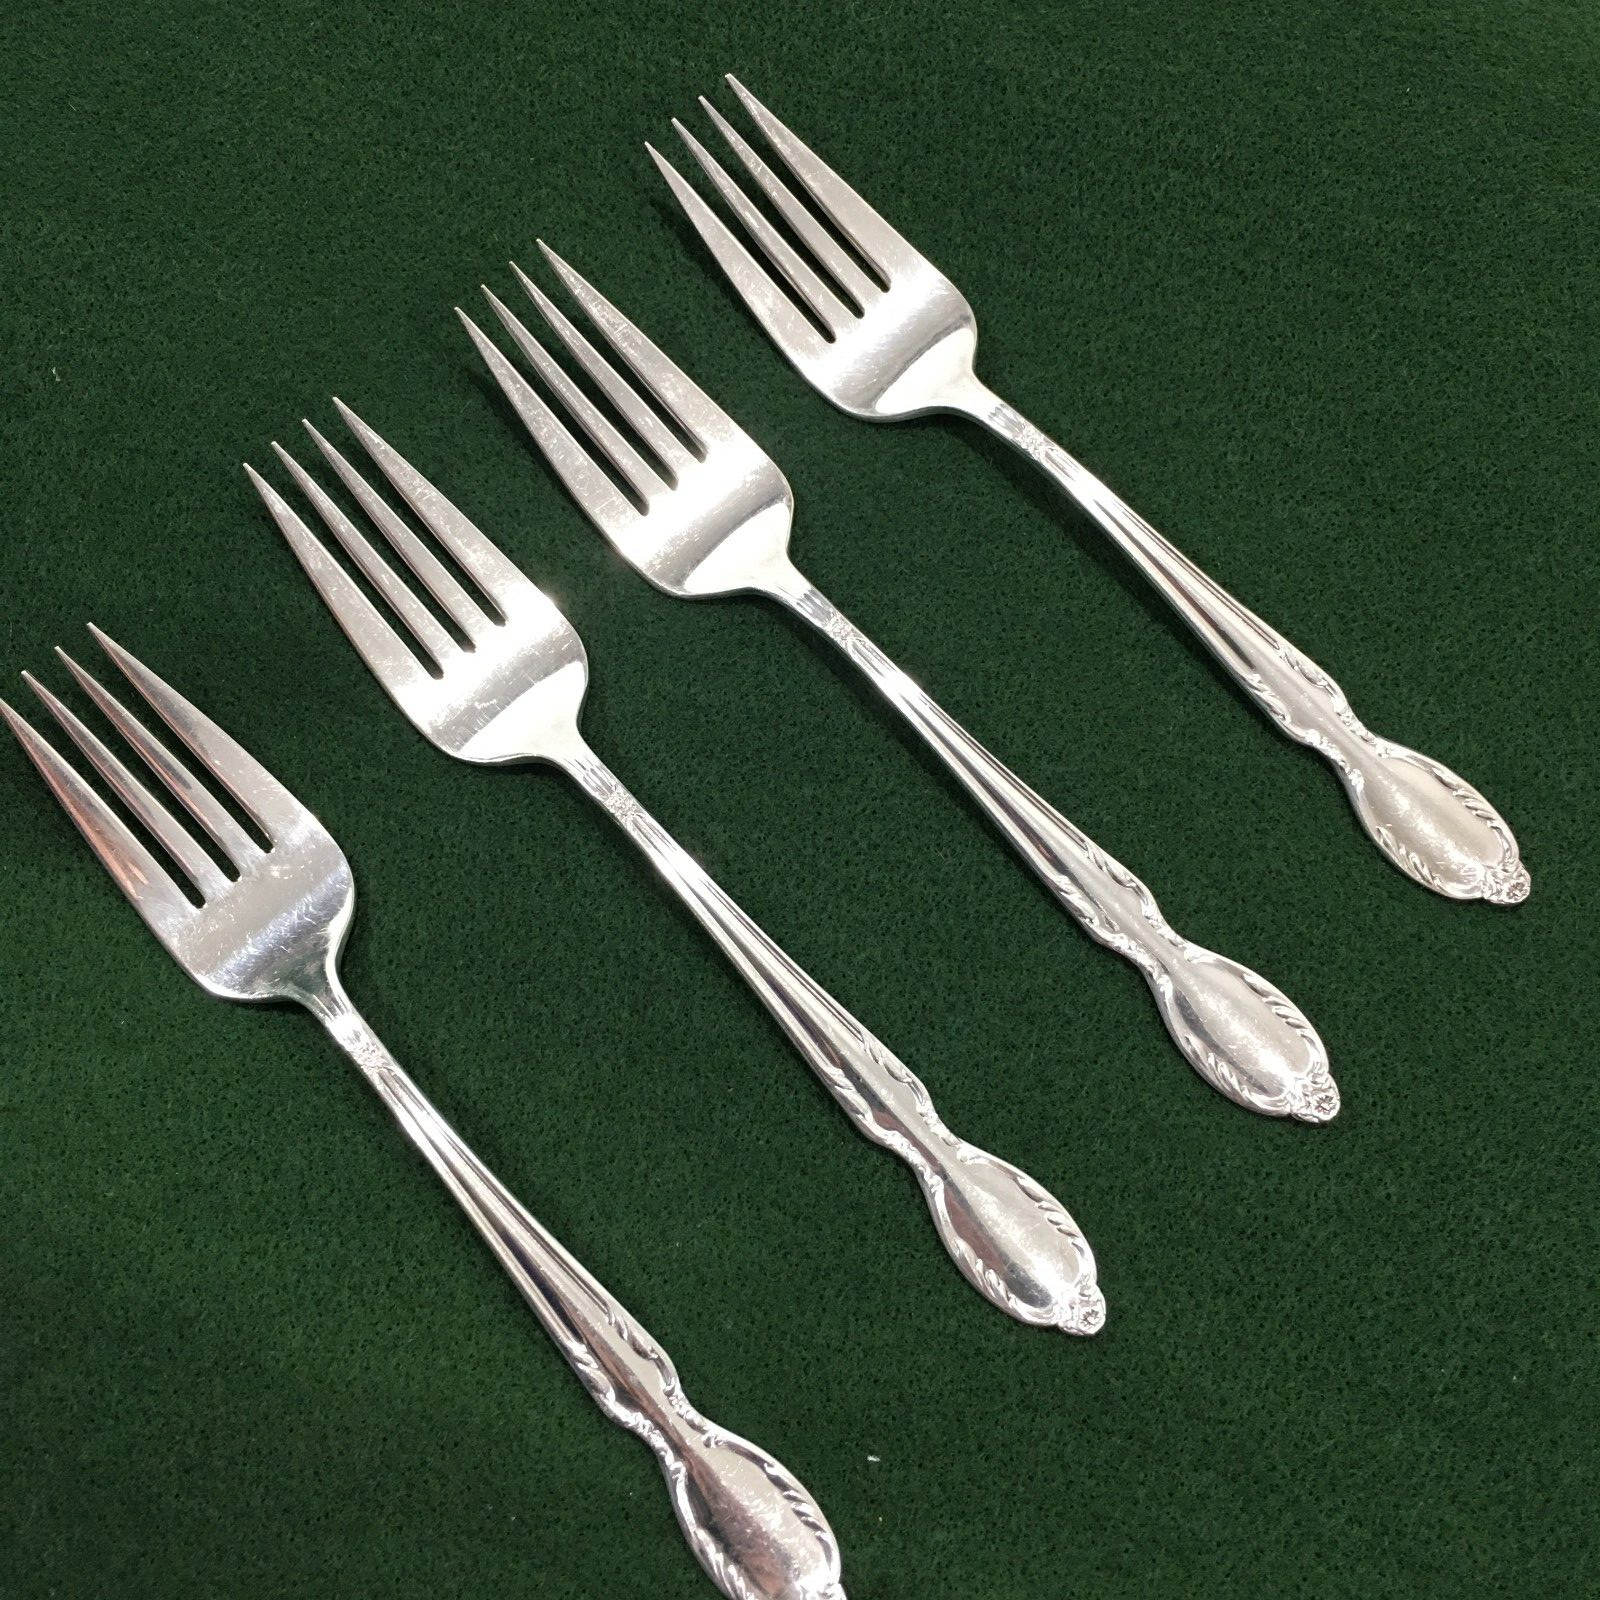 Primary image for Rogers Bros Royal Manor Silverplate Set of 4 Salad Forks 6 1/2" Original Rogers